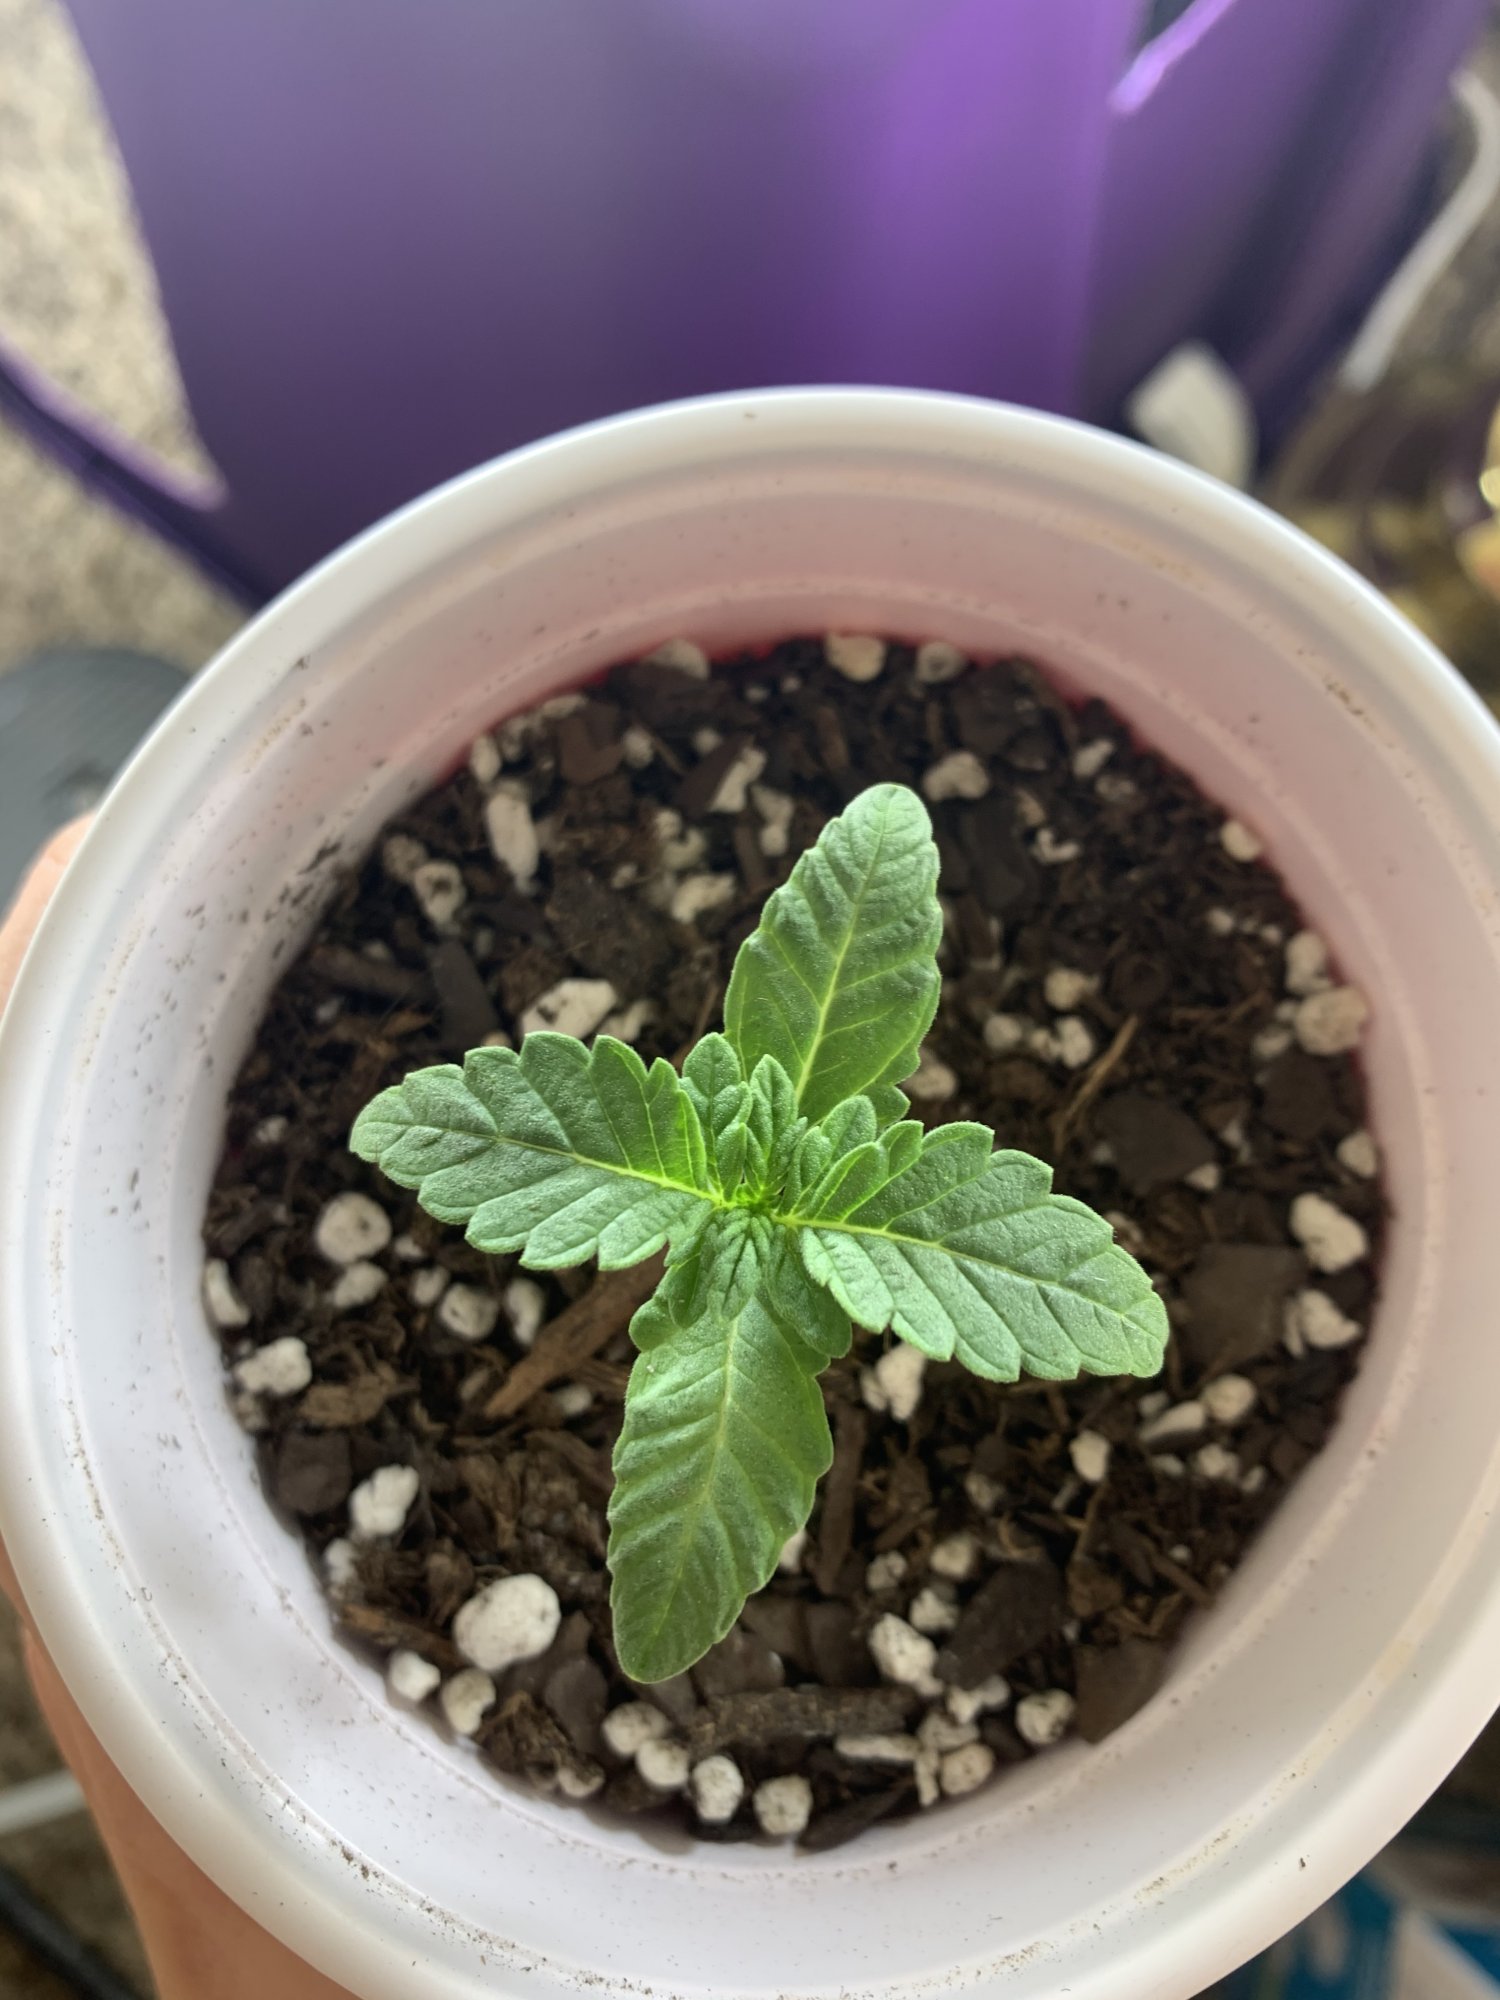 Whats wrong with my seedlings 4